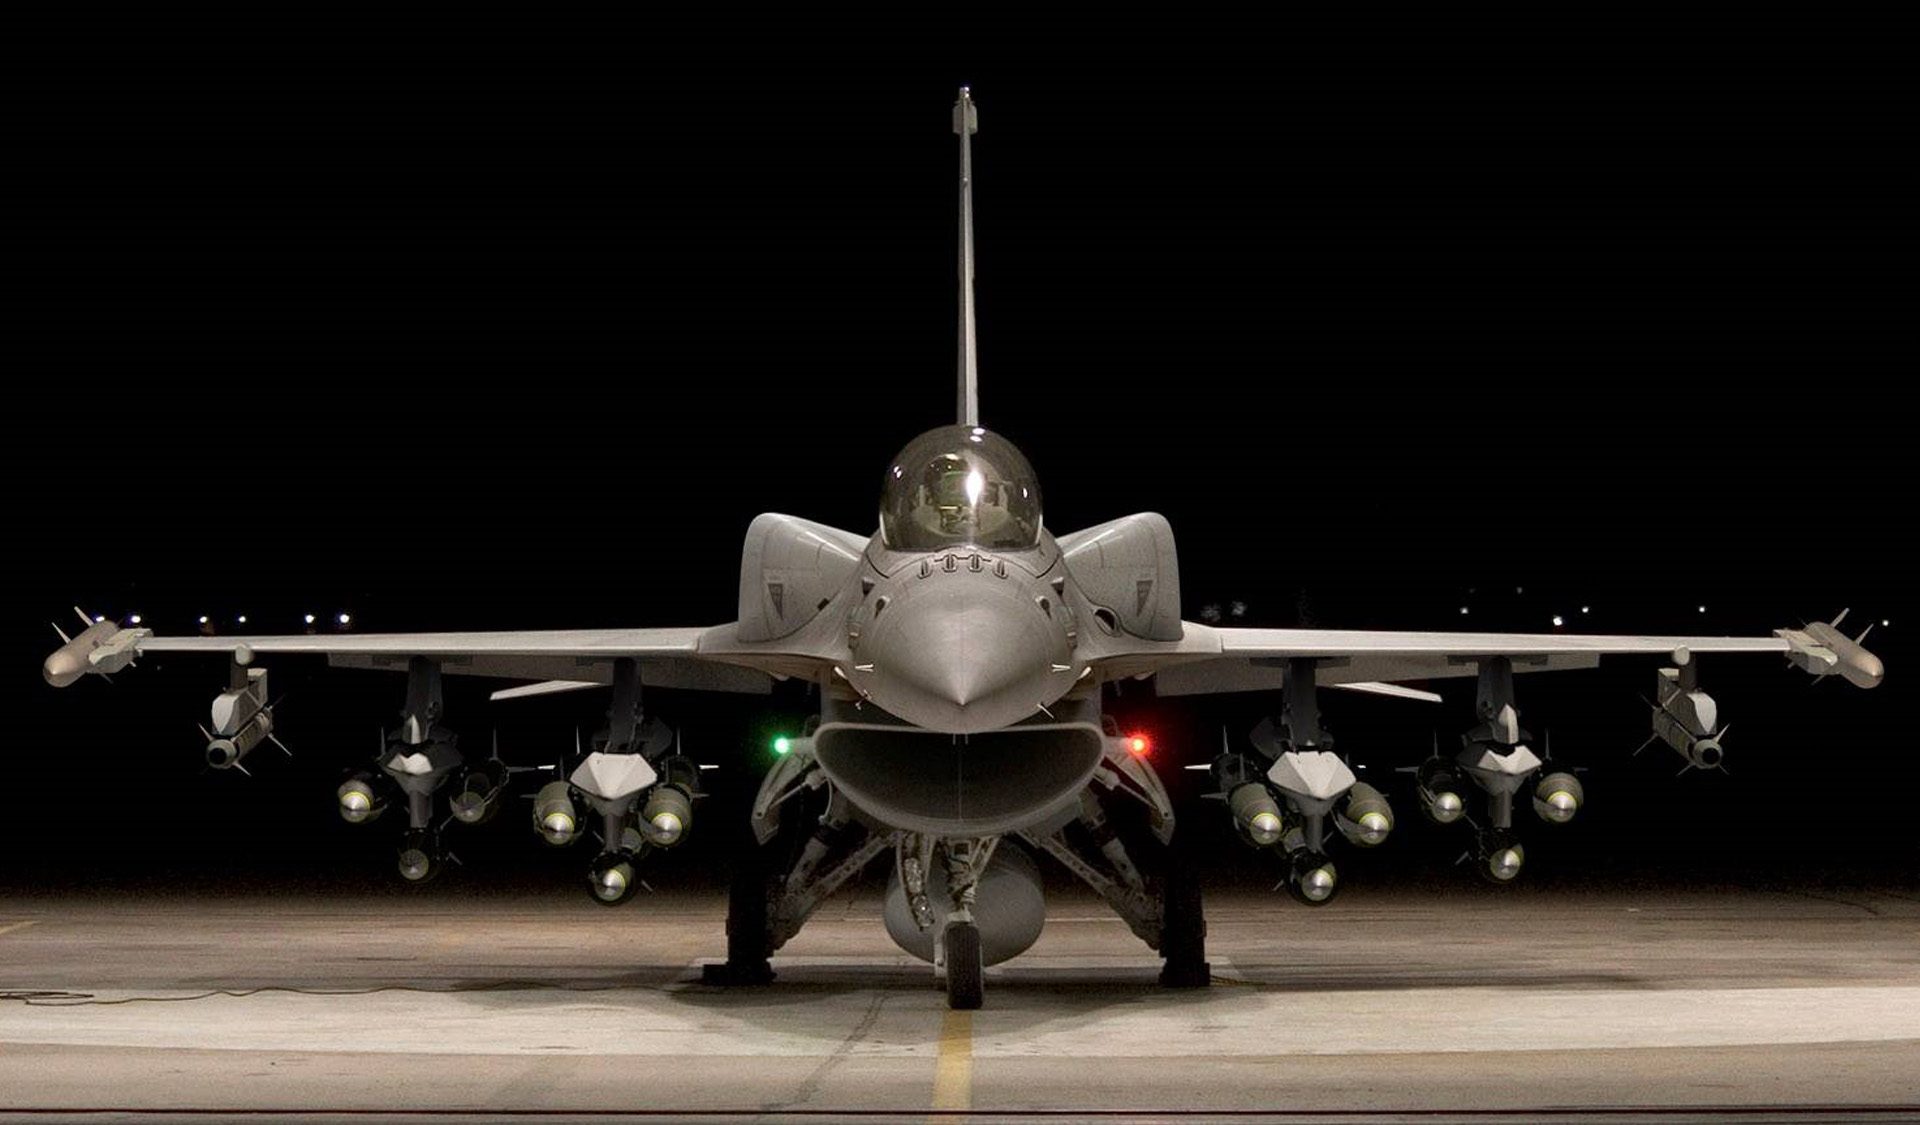 Slovakia selects Lockheed Martin F-16V over Saab Gripen to replace its ageing MiG-29 jets